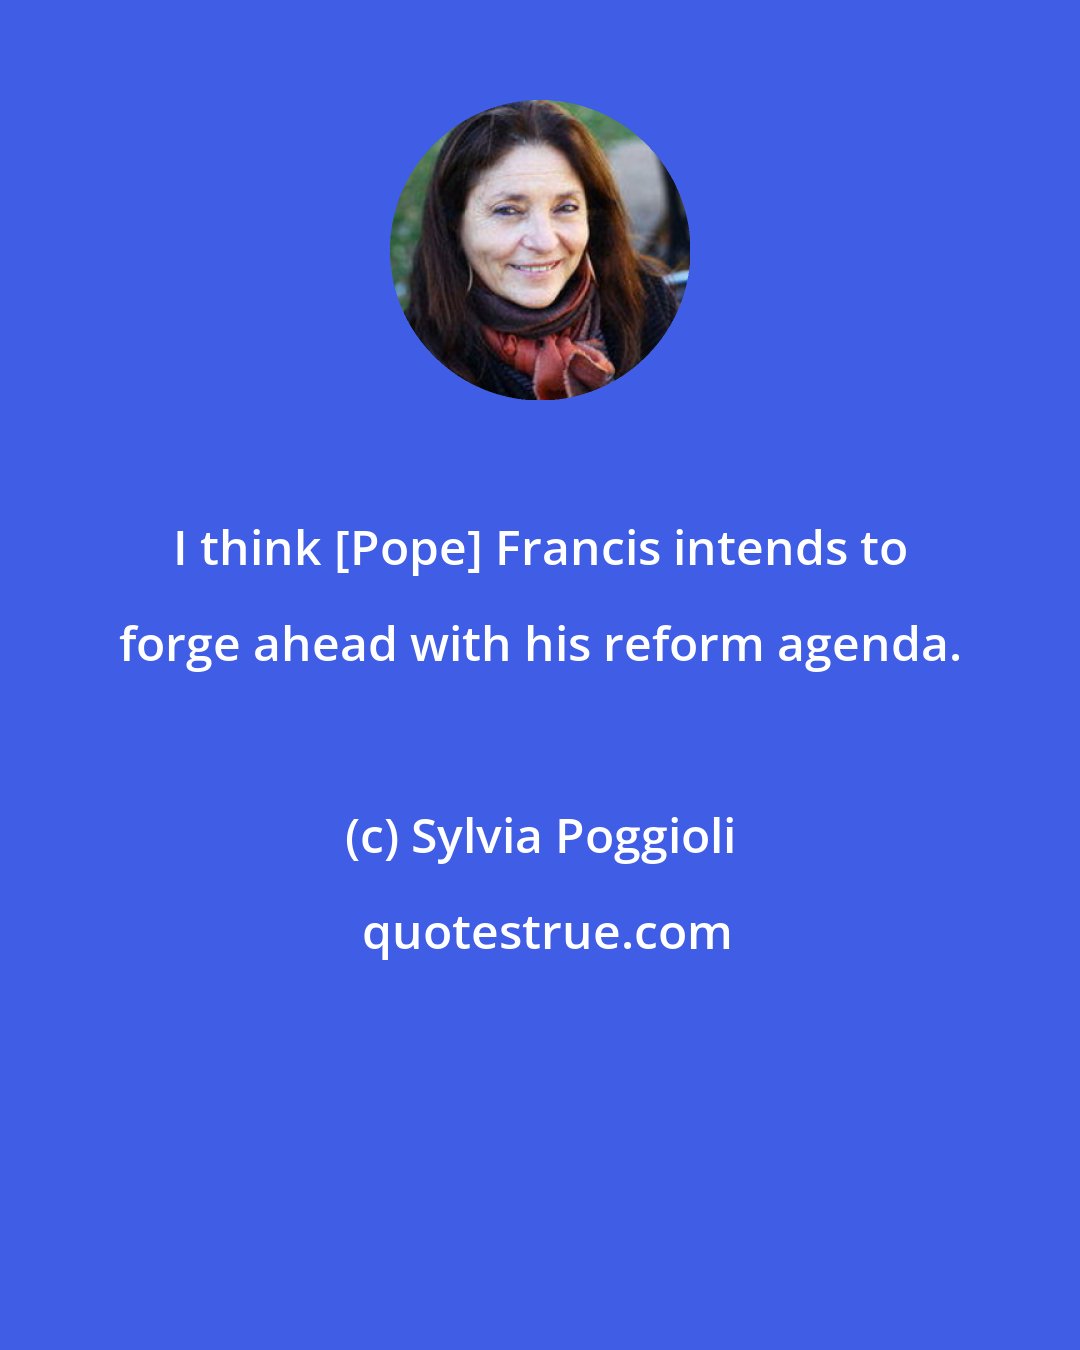 Sylvia Poggioli: I think [Pope] Francis intends to forge ahead with his reform agenda.